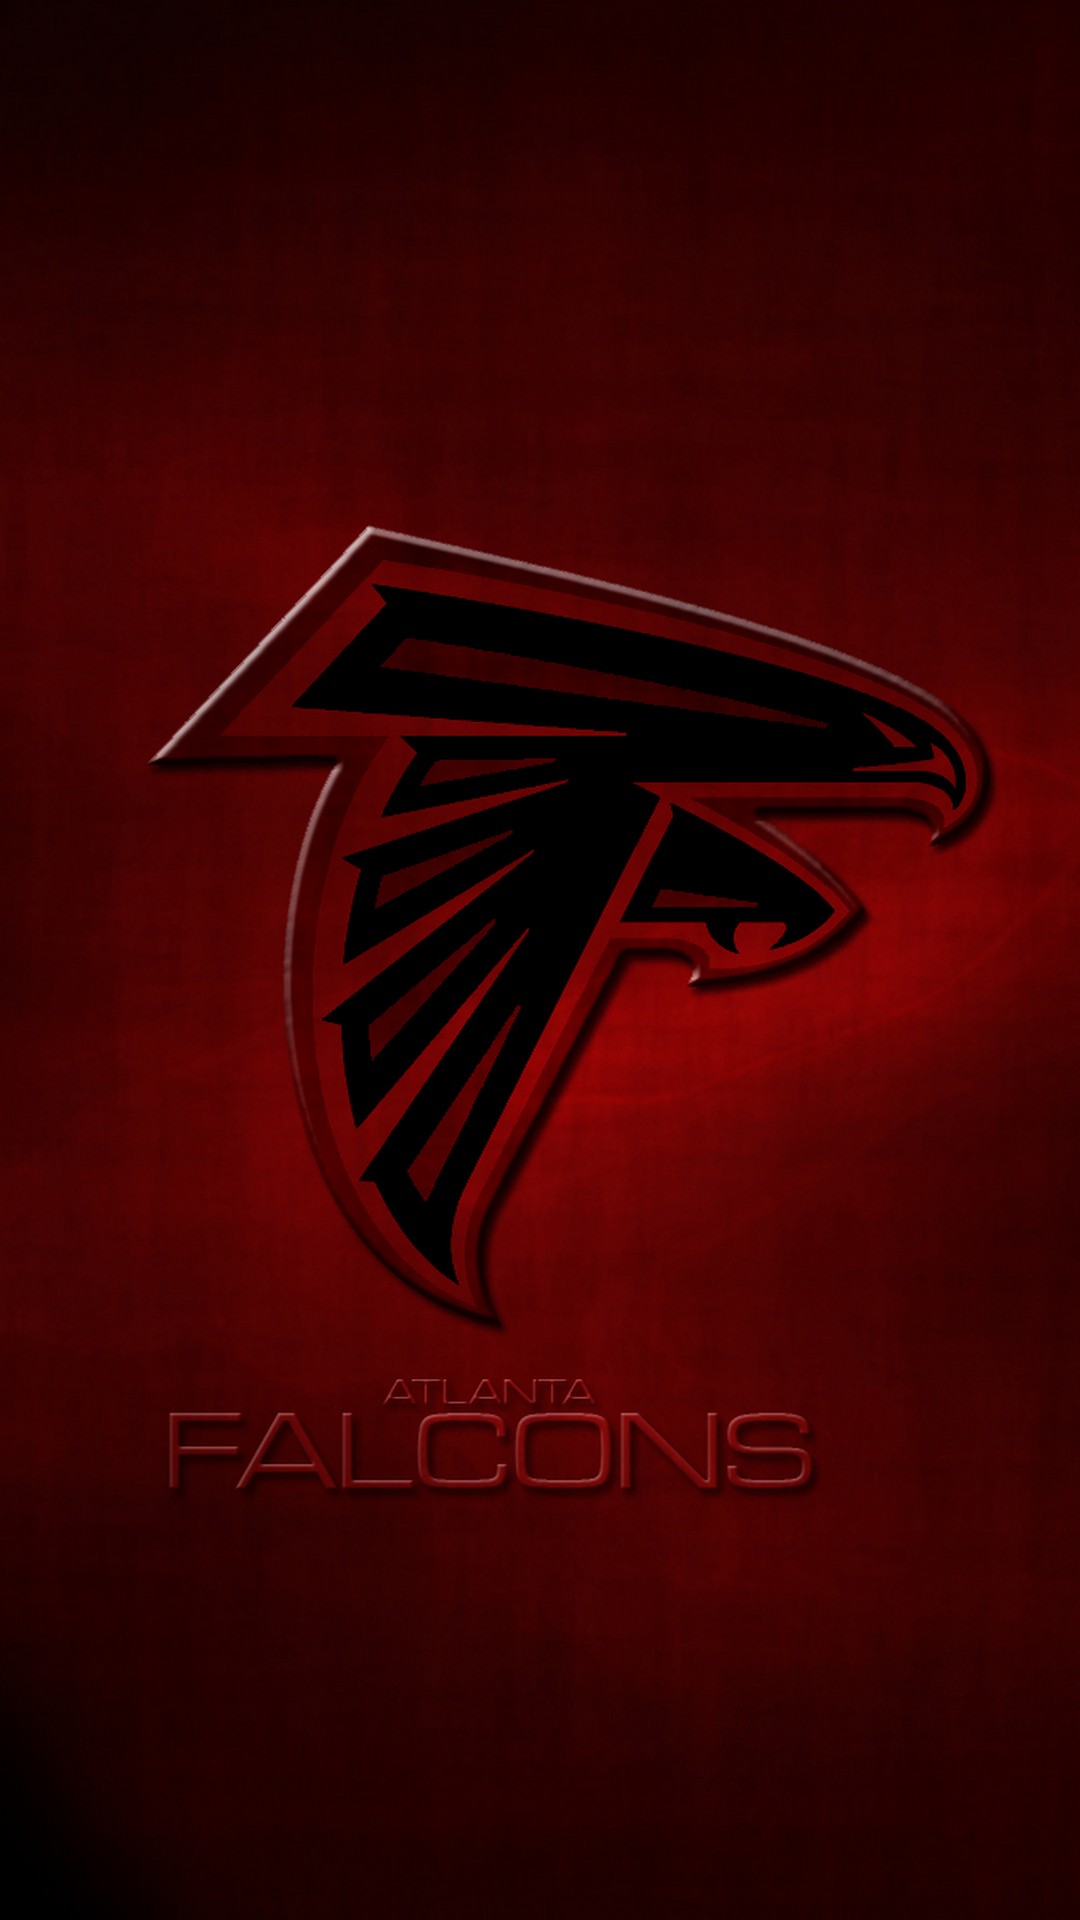 Wallpapers iPhone Atlanta Falcons With high-resolution 1080X1920 pixel. Donwload and set as wallpaper for your iPhone X, iPhone XS home screen backgrounds, XS Max, XR, iPhone8 lock screen wallpaper, iPhone 7, 6, SE, and other mobile devices